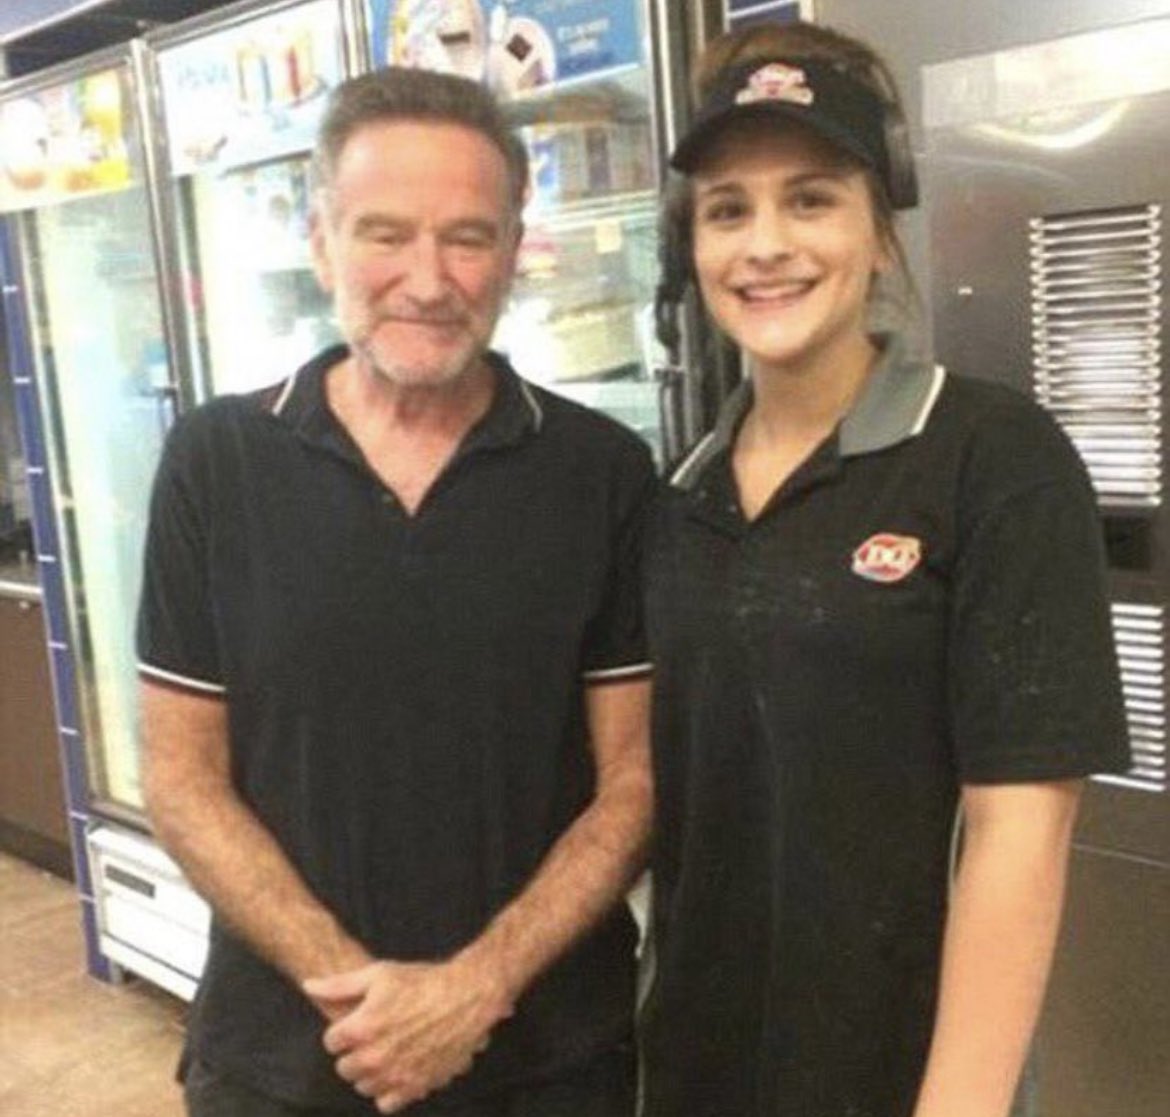 One of the last known images of Robin Williams taken before he tragically ended his own life.